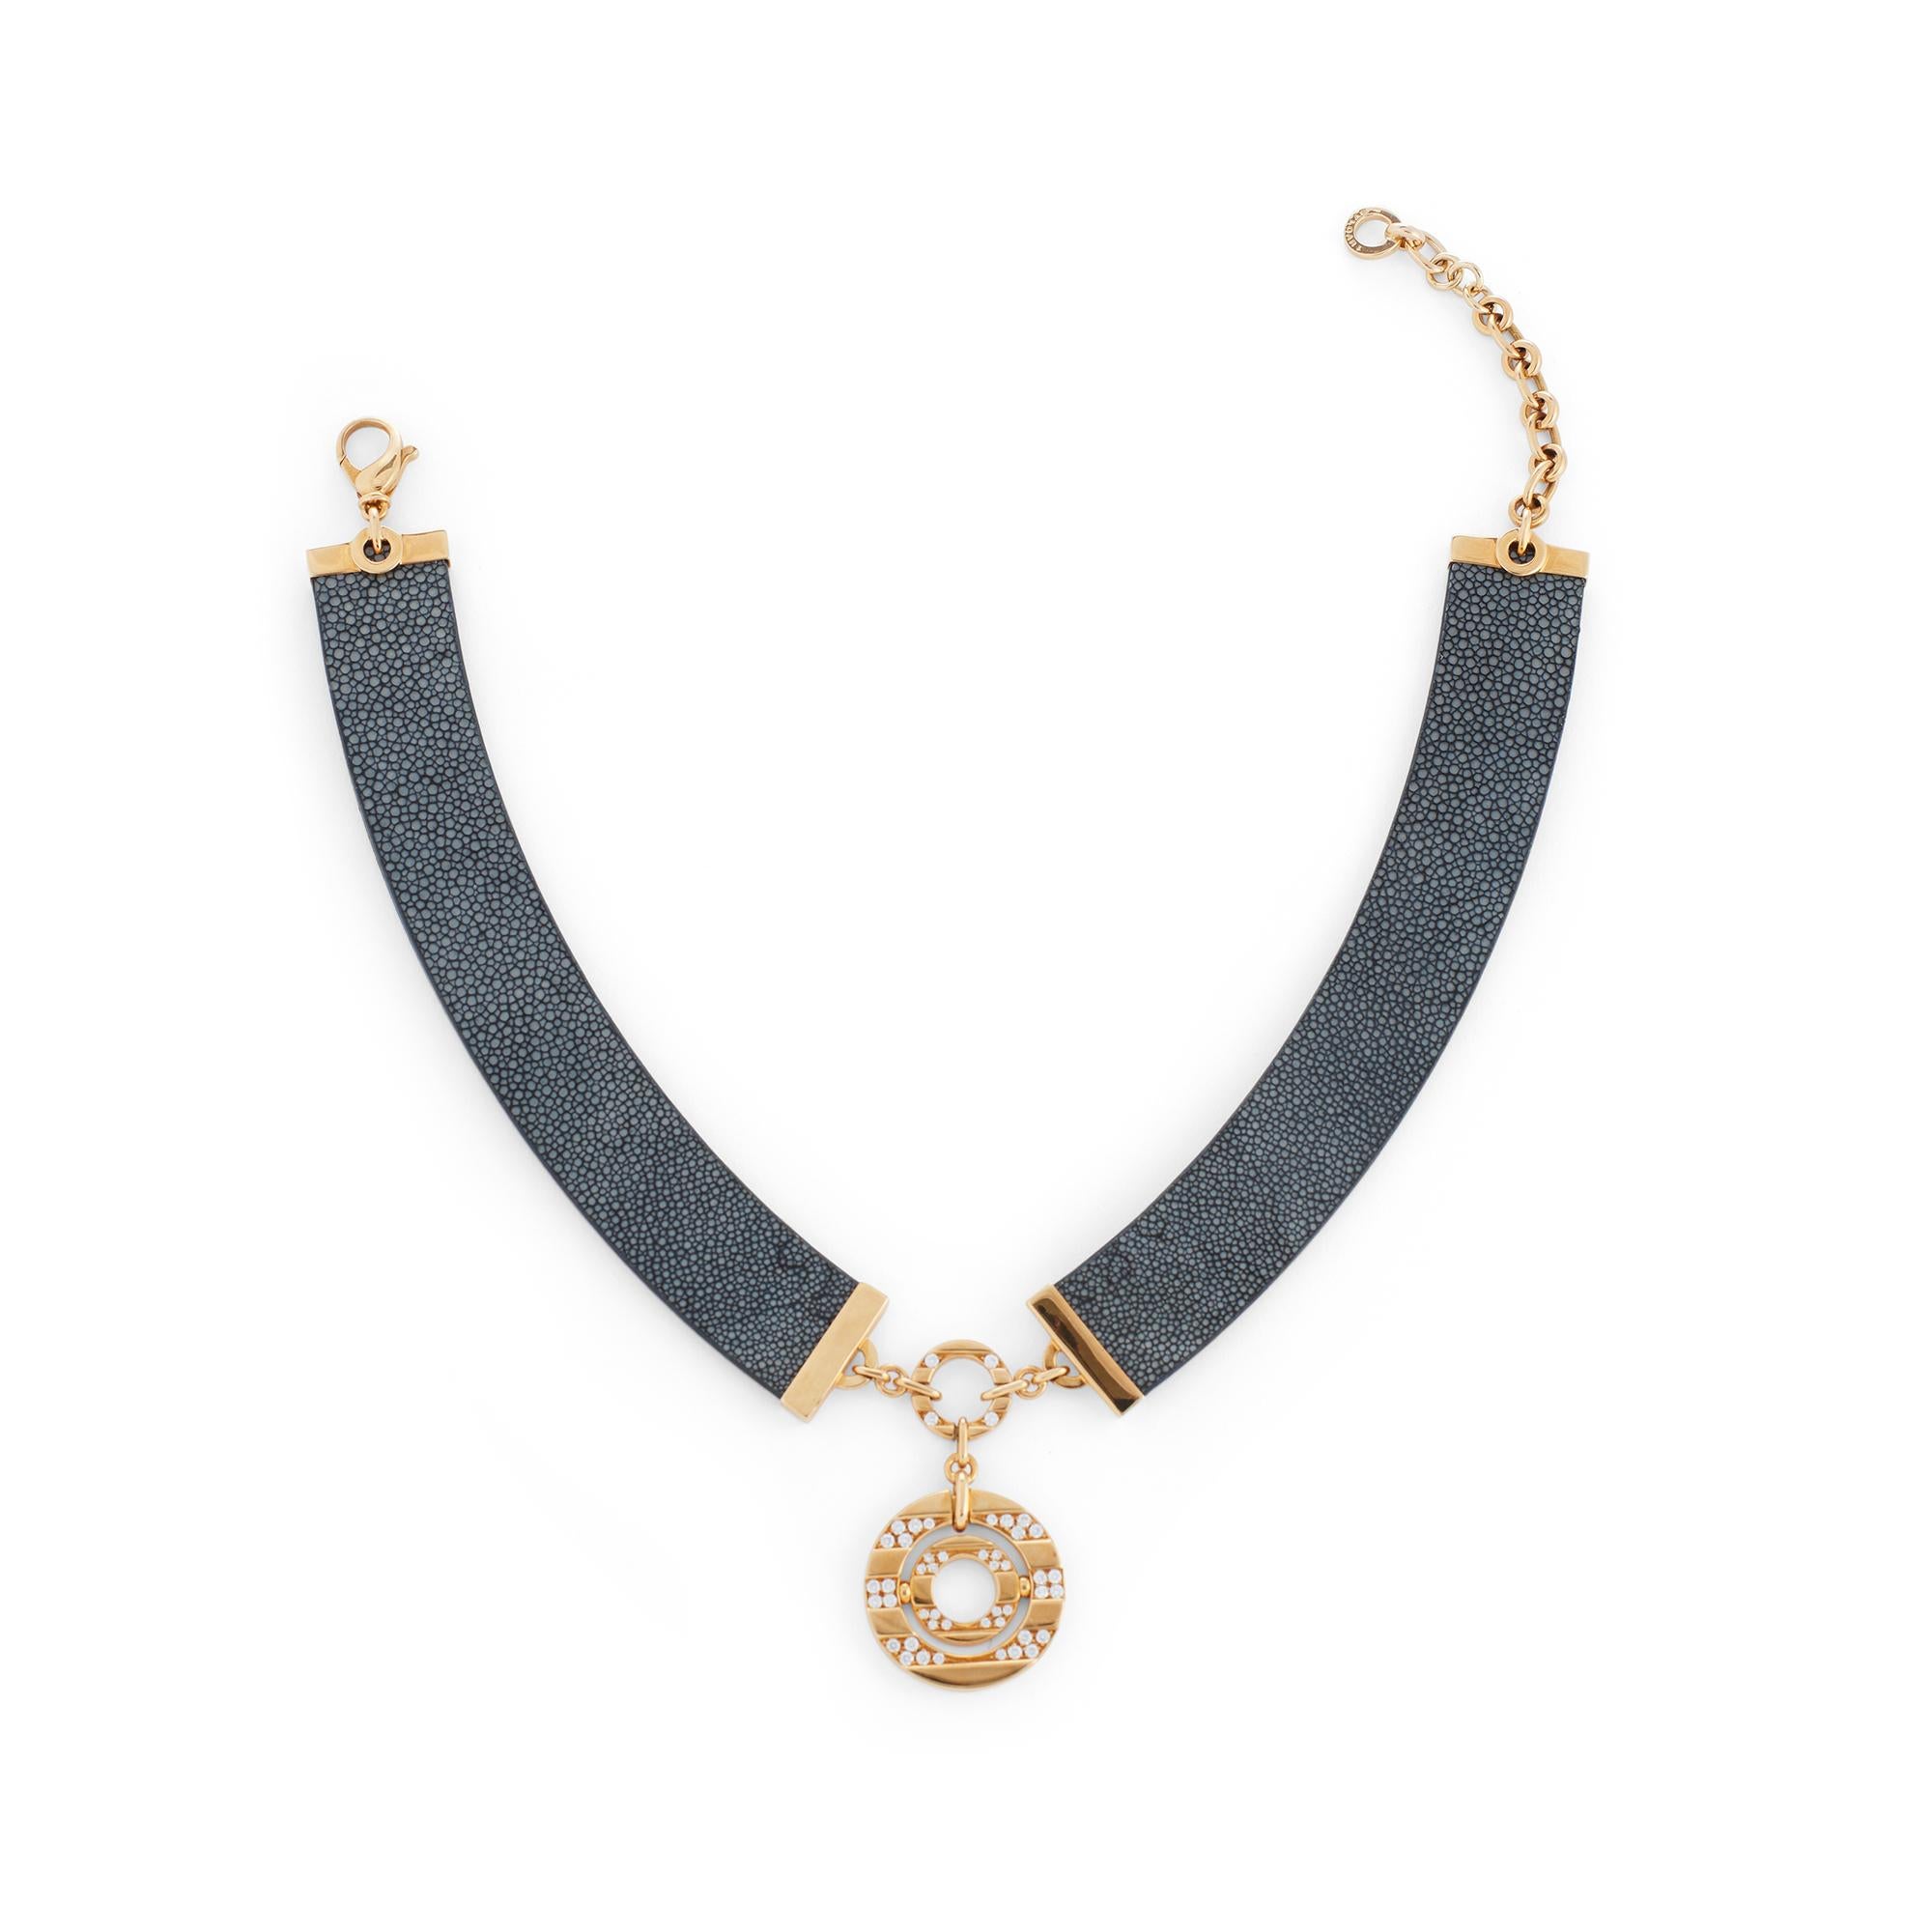 Authentic Bvlgari Astrale pendant necklace crafted in 18 karat yellow gold.  Featuring a circular Astrale pendant accented with an estimated 1.40 carats of round brilliant cut diamonds.  The pendant is situated on a collar of gray-black galuchat